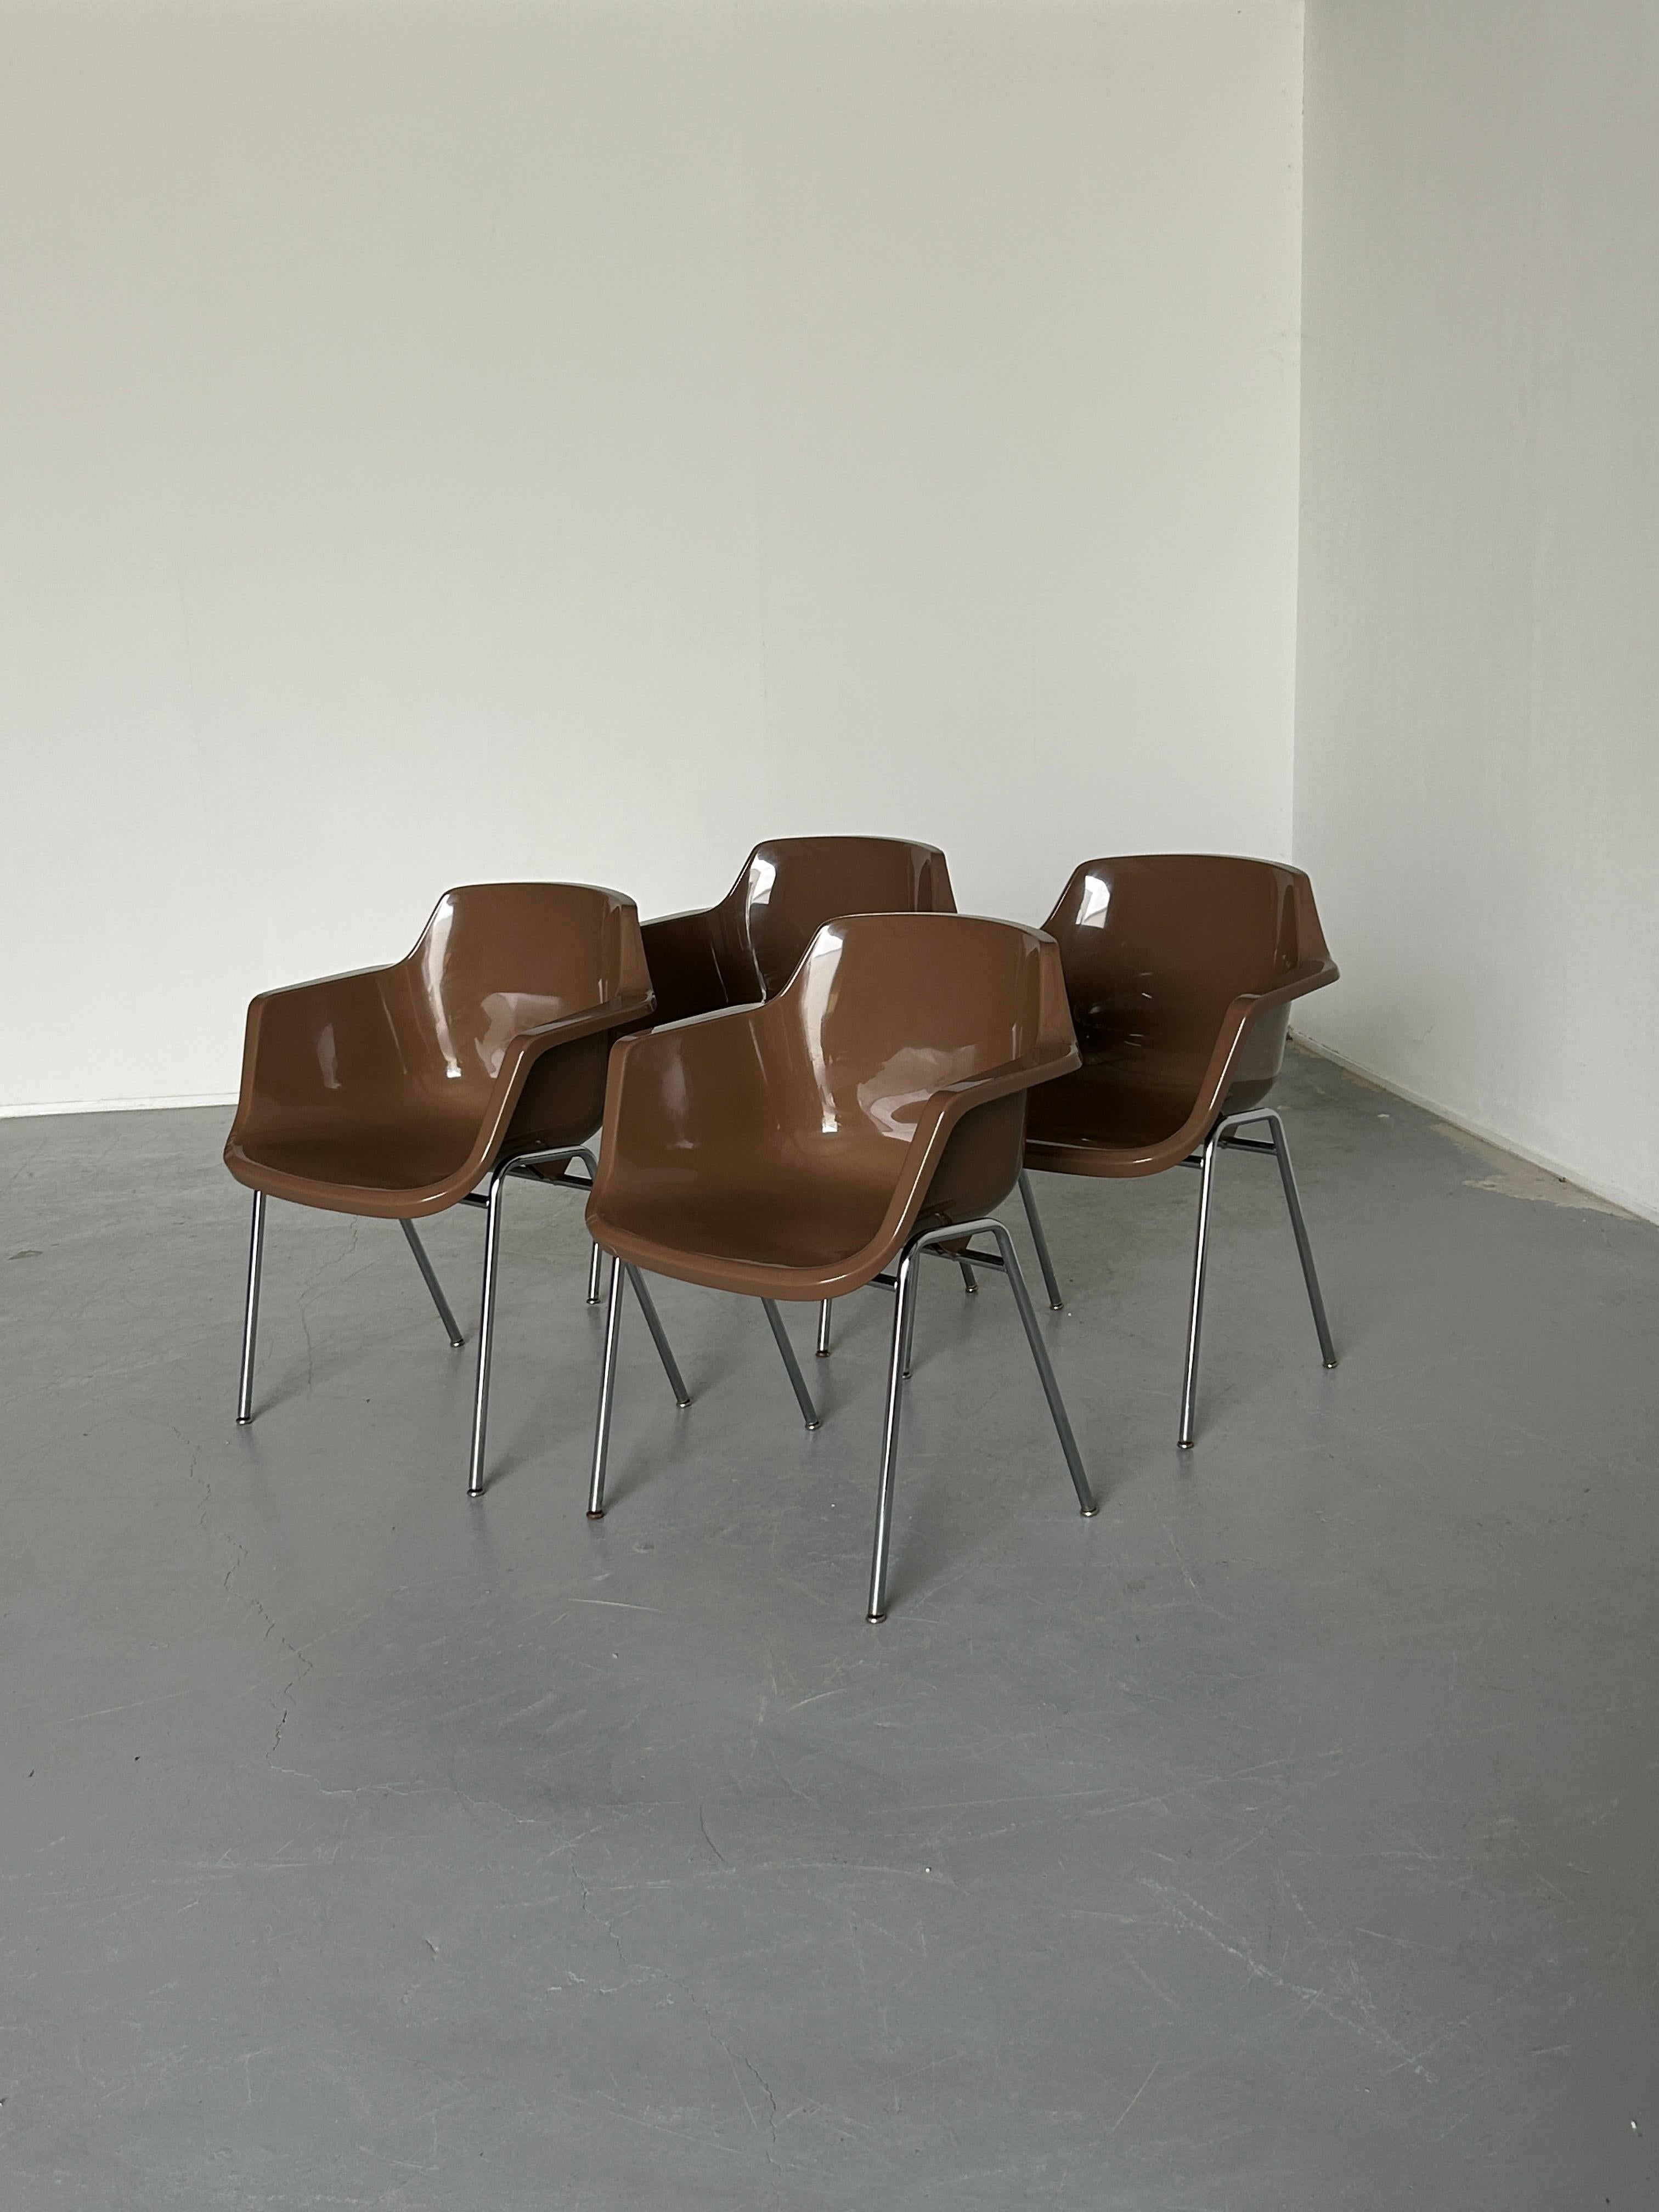 Late 20th Century 1 of 4 Vintage Mid-Century Shell Plastic Dining Chairs in style of Eames Shell  For Sale